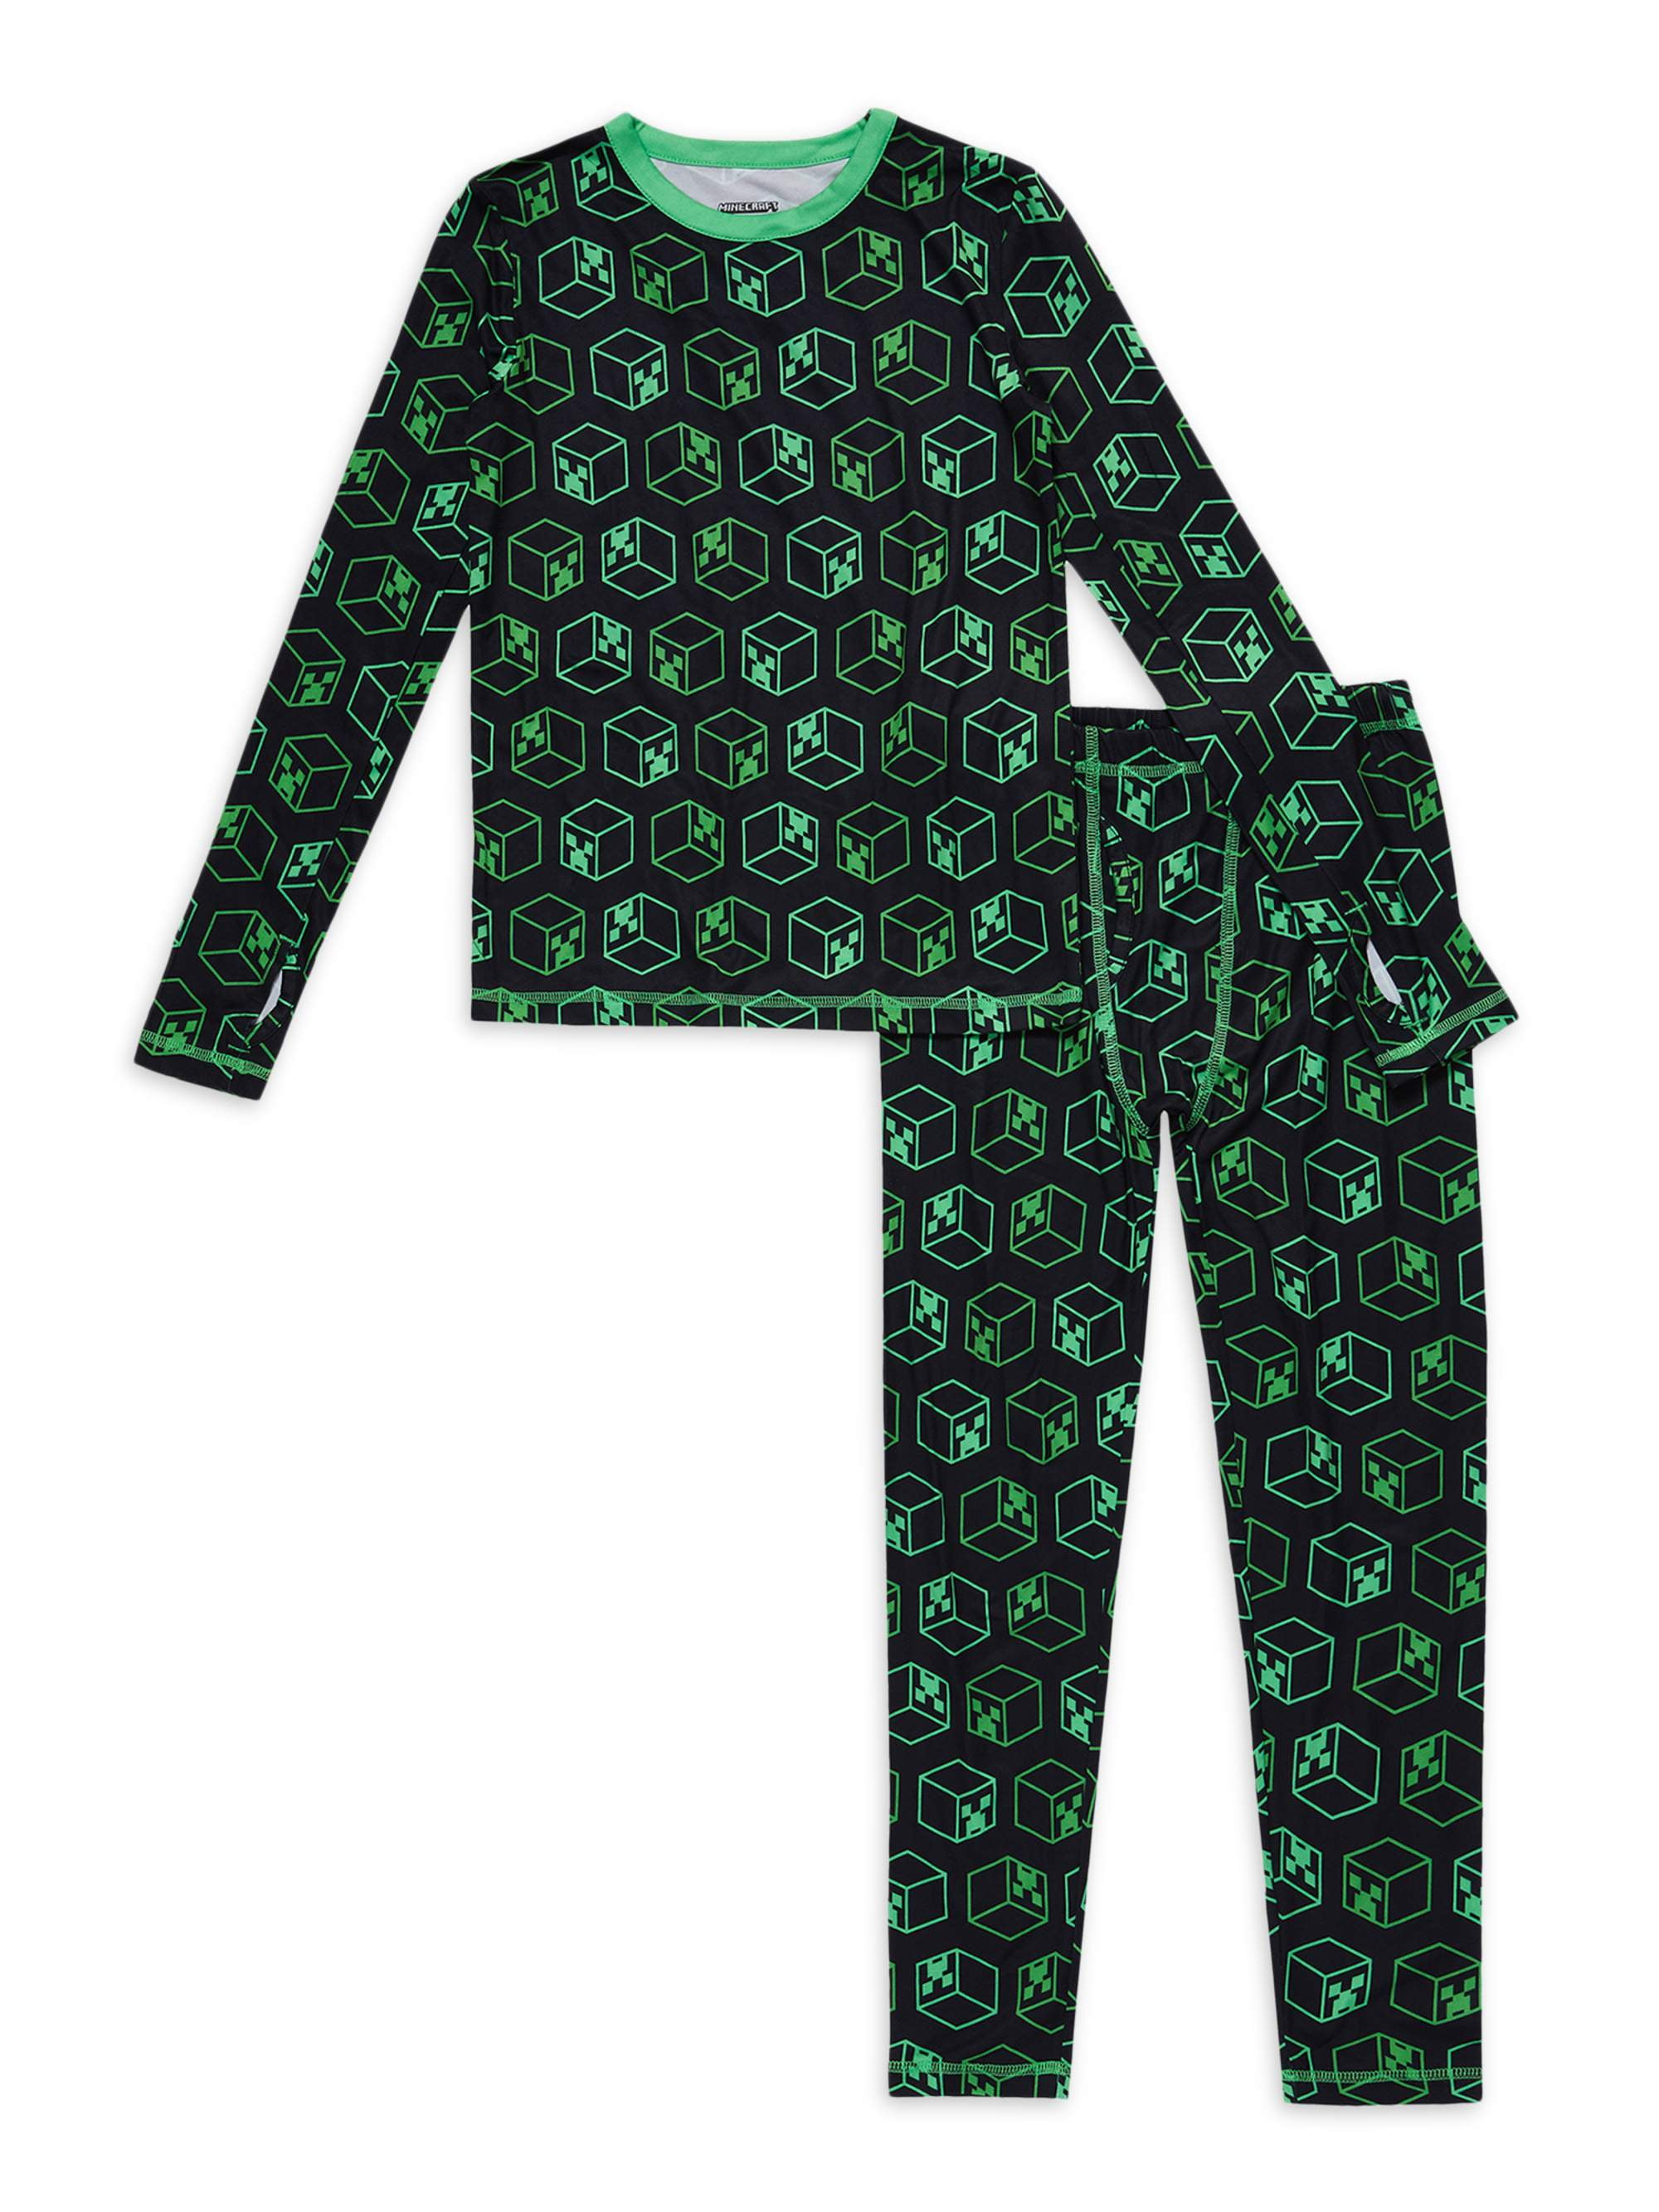 Minecraft Long Sleeve shirt and pants Thermal Underwear set for Boys 